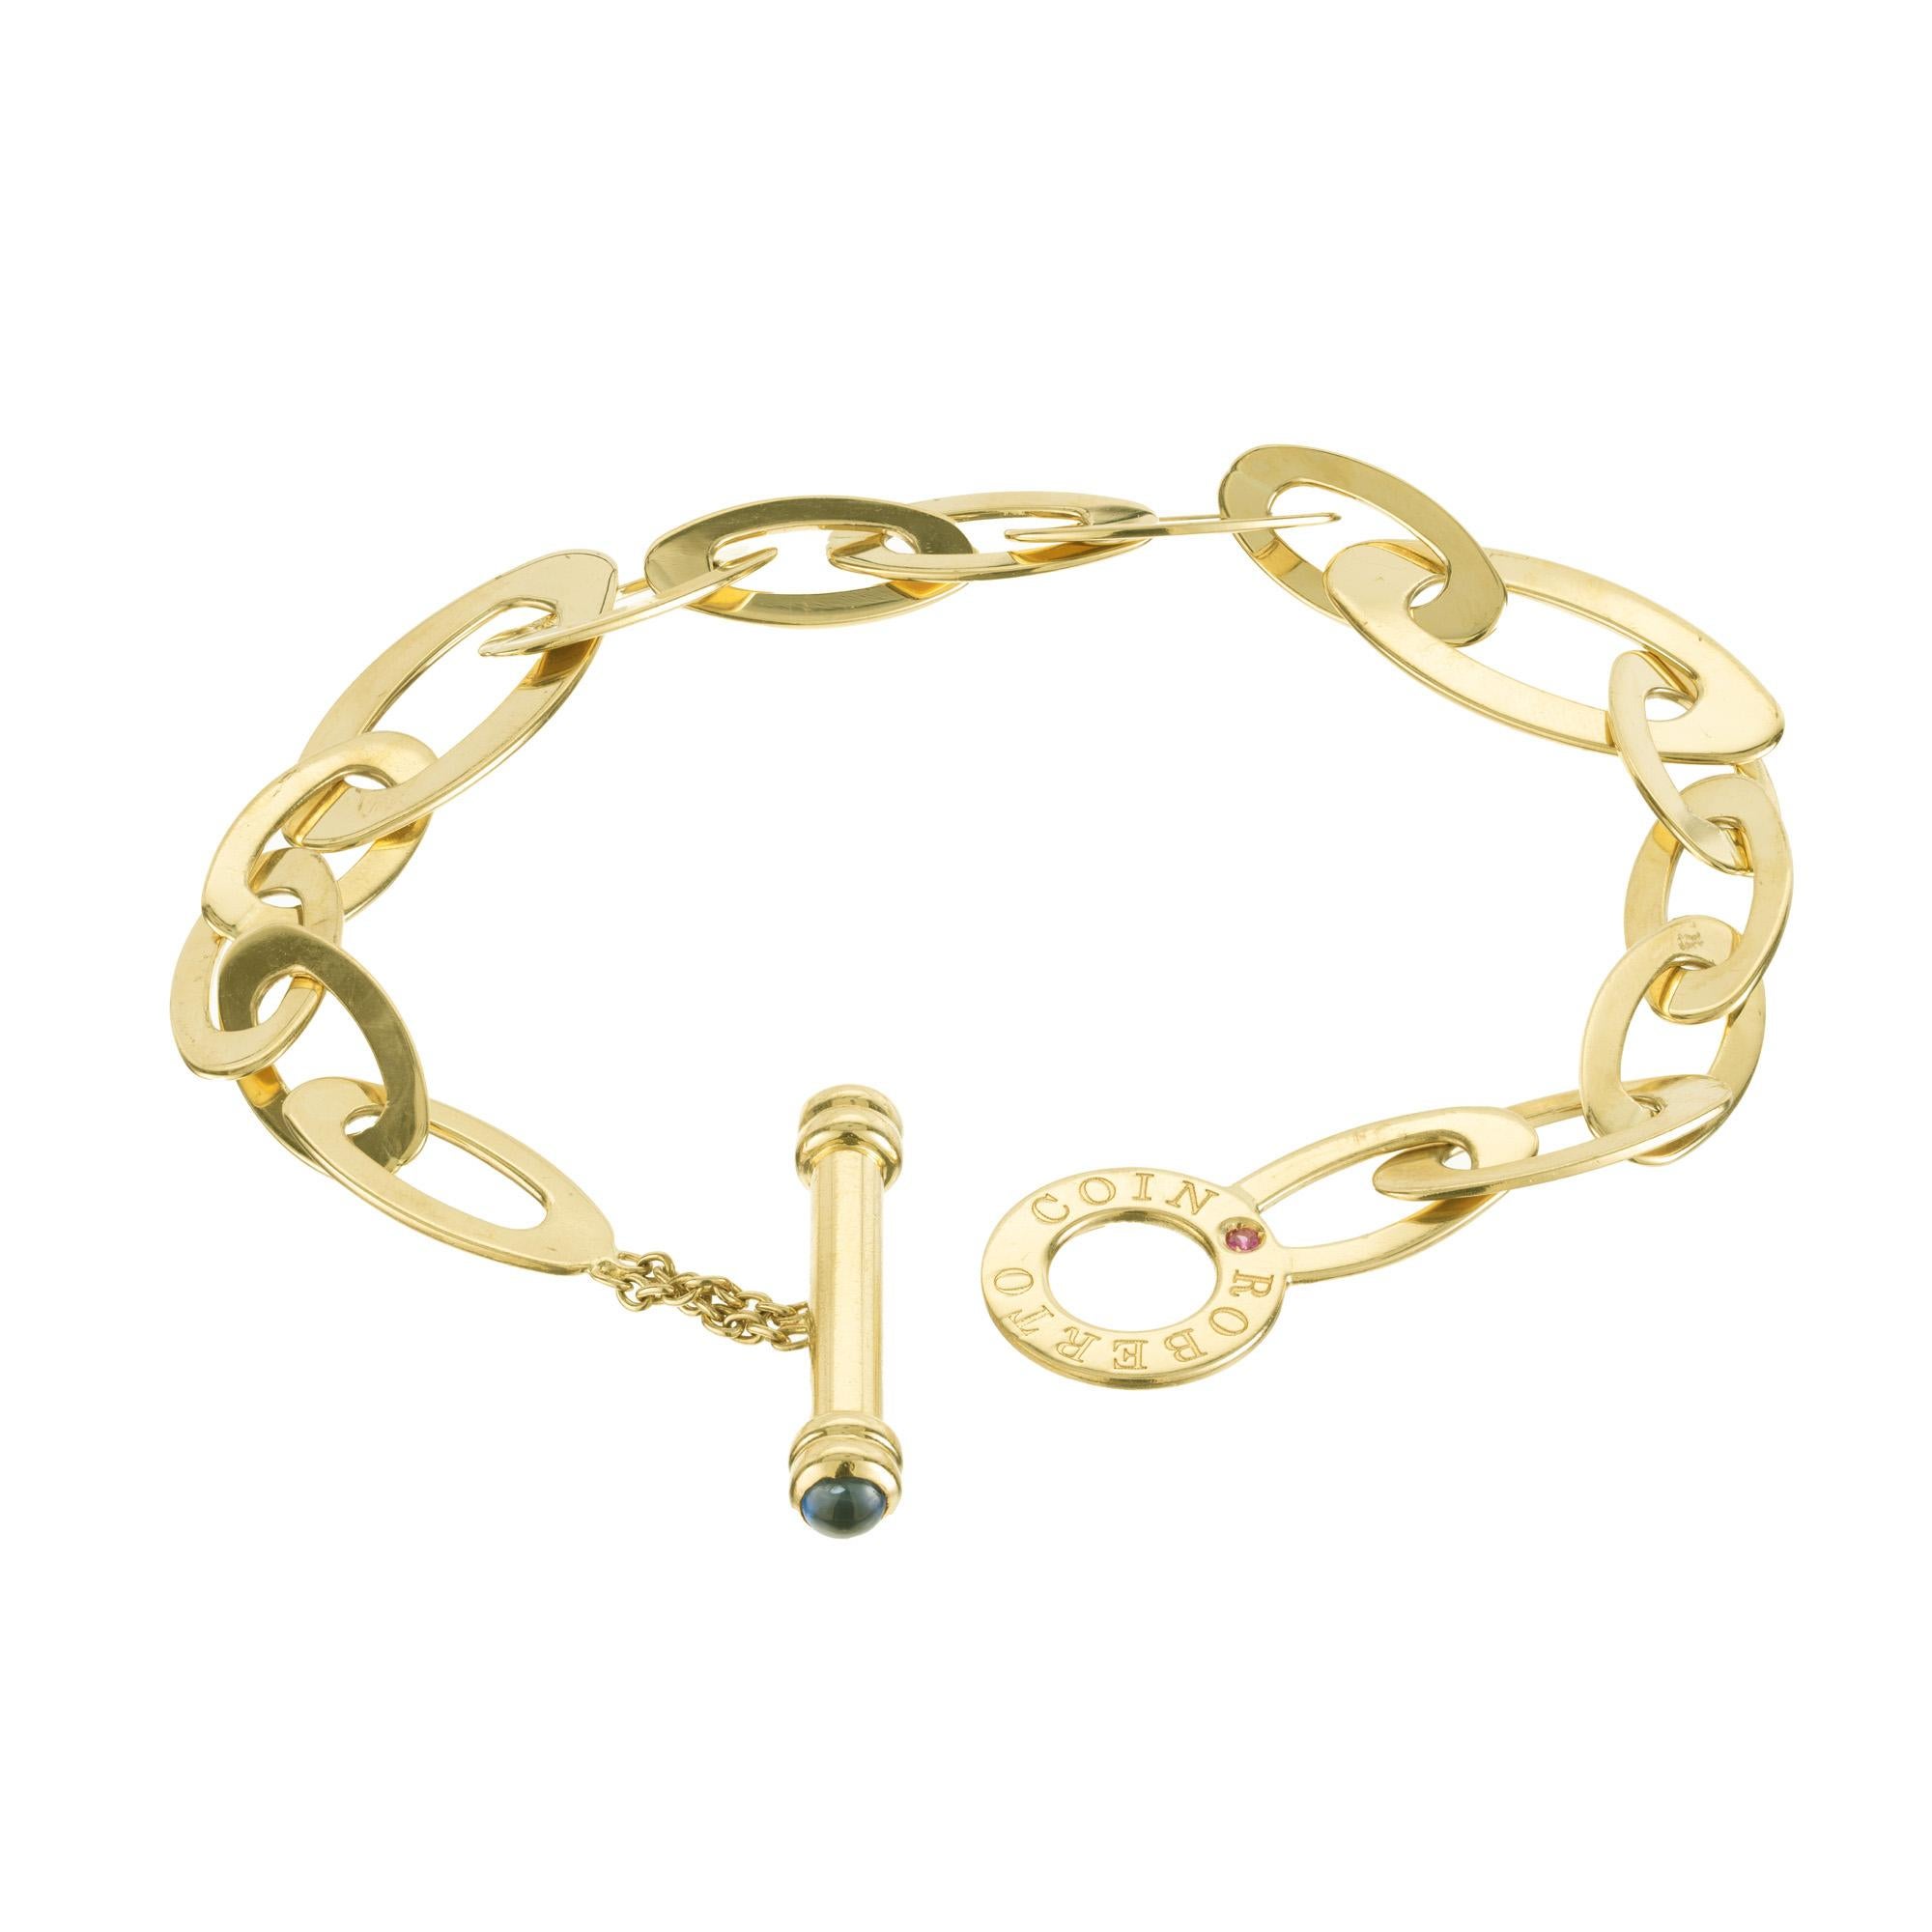 Classic oval link chic and shine Roberto Coin 18k yellow gold link bracelet. Classic Roberto Coin design. This bracelet is 7.75 inches in length. It is accented with one round red ruby and tow cabochons sapphires on each end of the bar. 

2 cabochon